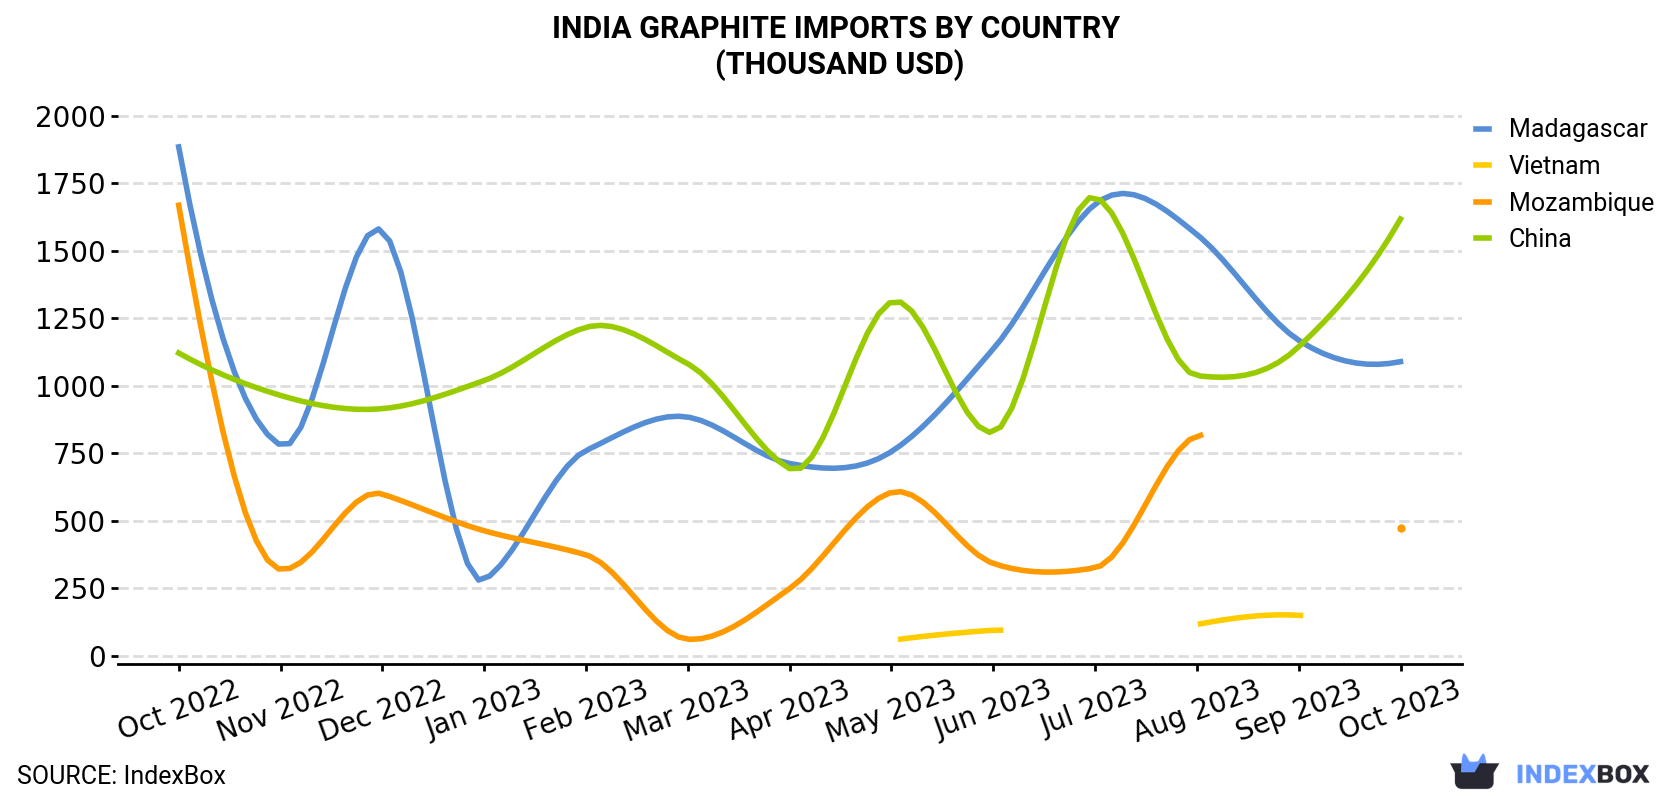 India Graphite Imports By Country (Thousand USD)